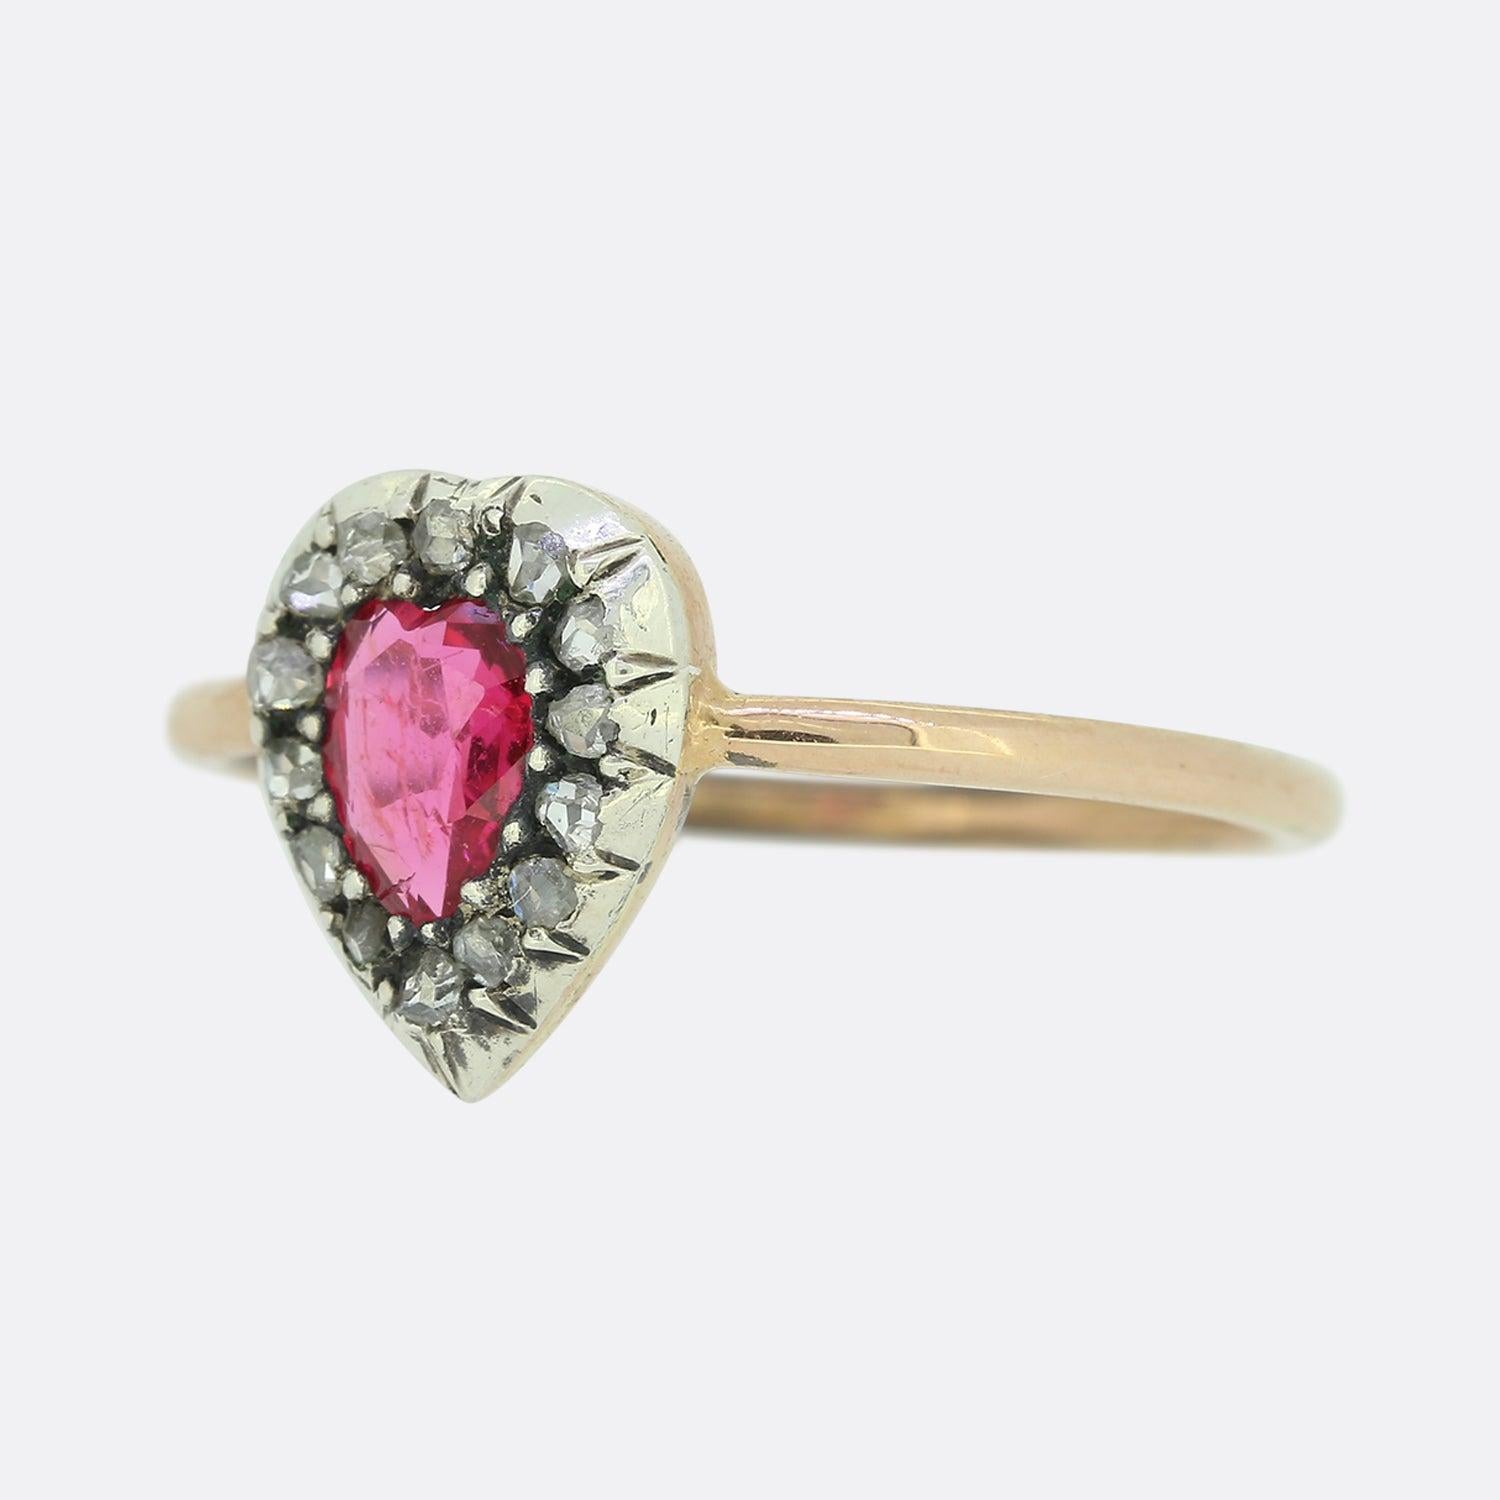 Here we have a fabulous spinel and diamond ring originally dating back to the Victorian era. This ring has been crafted in the shape of a single heart with a heart shaped spinel in the centre and surrounding rose cut diamonds set in silver. 

This